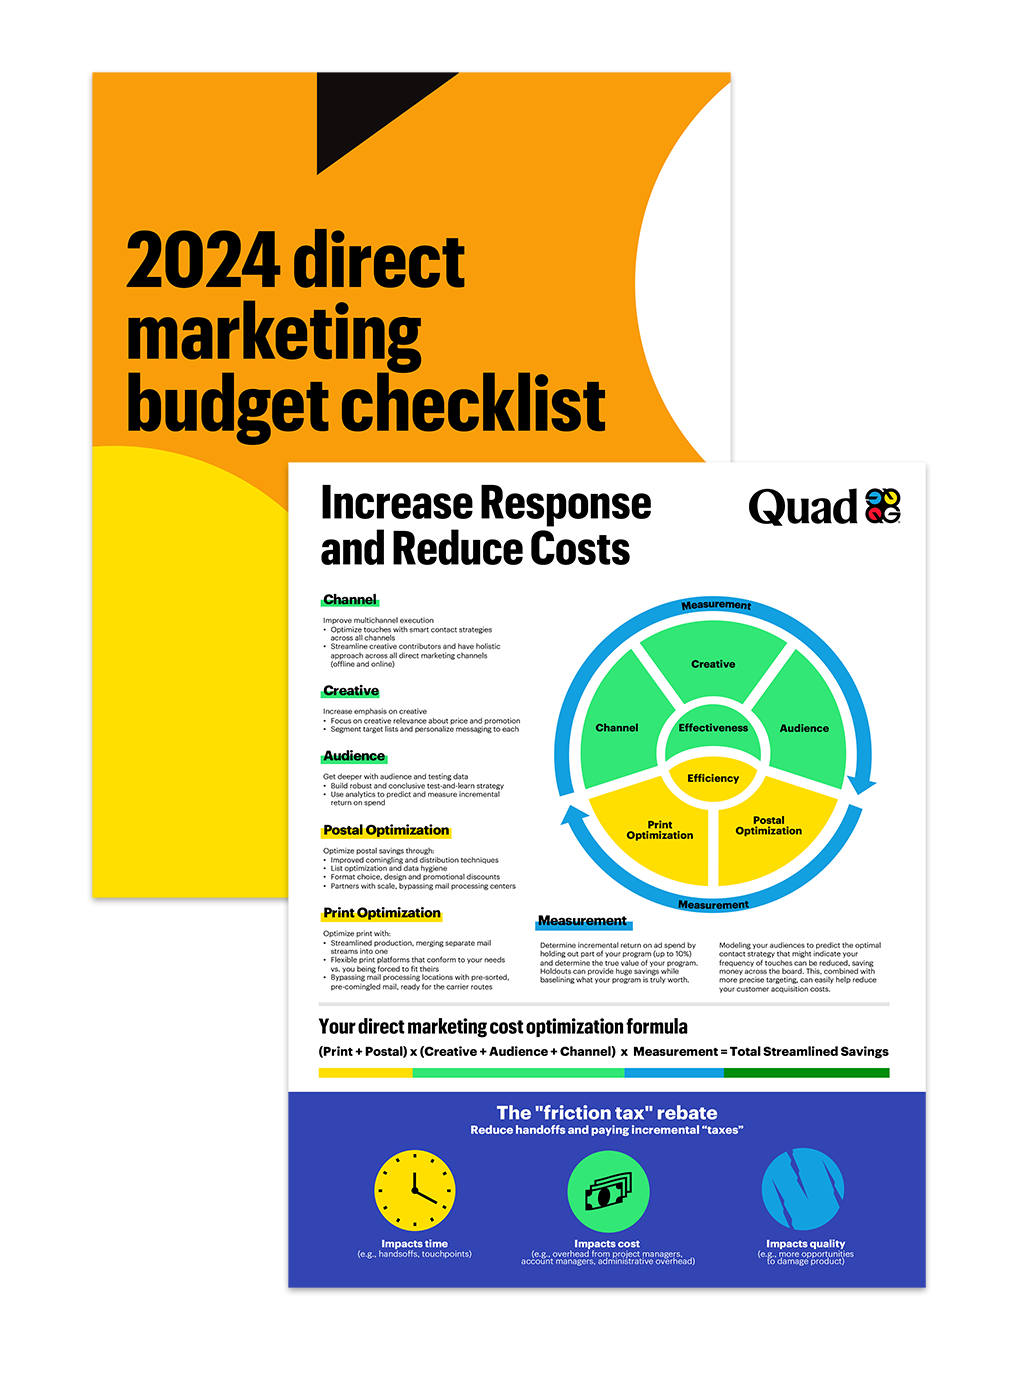 2024 Direct marketing budget planning checklist and infographic covers